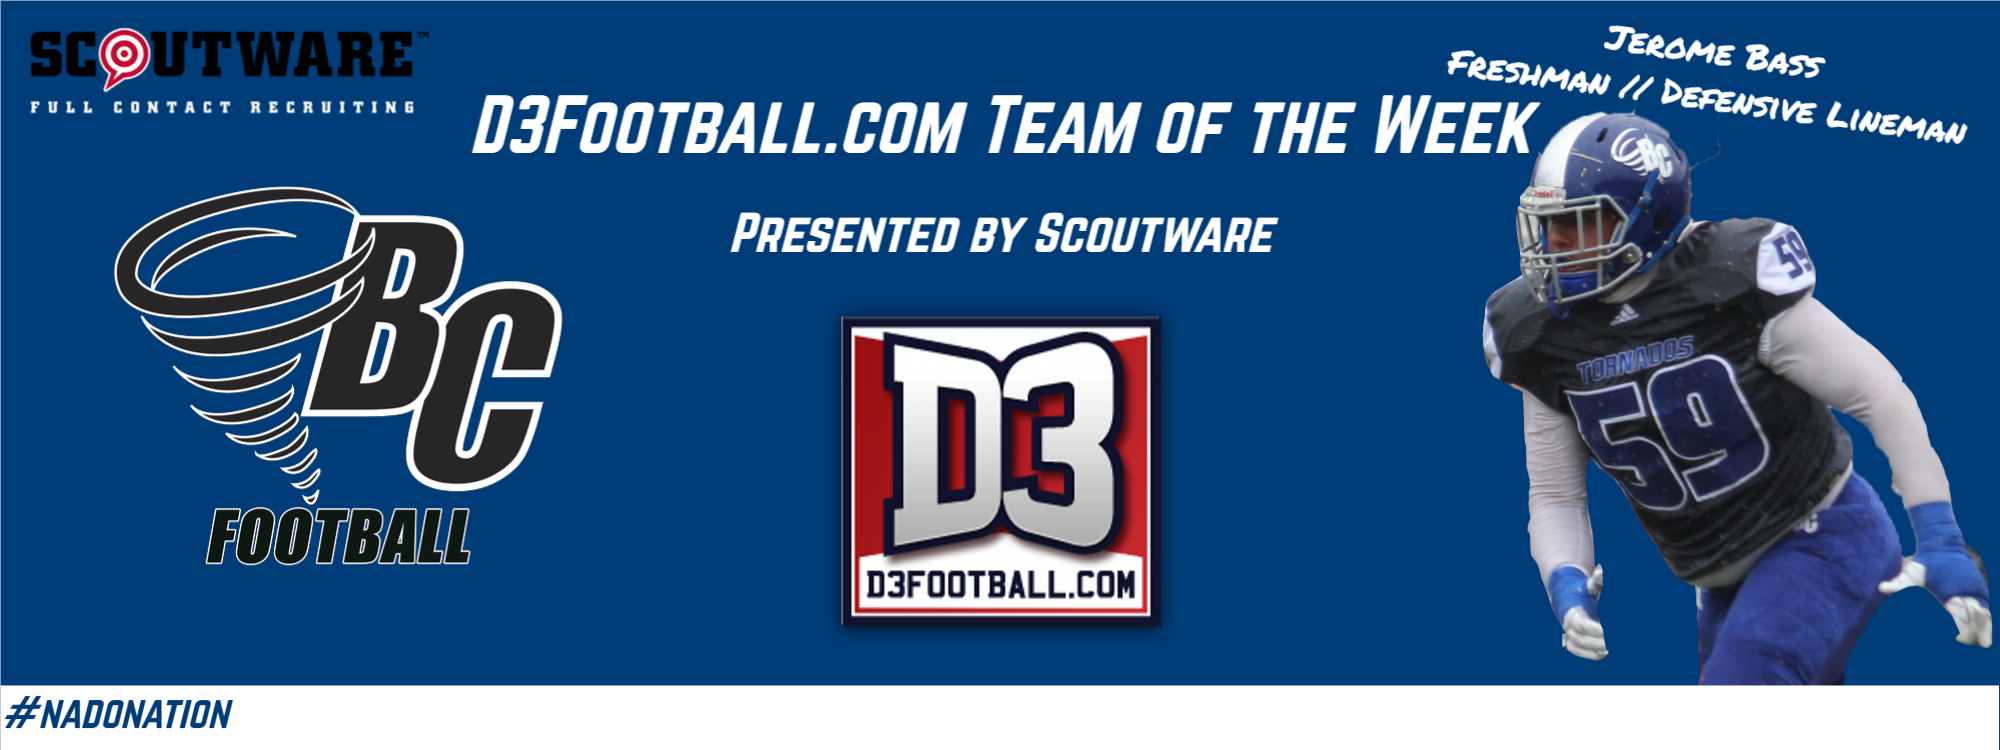 Jerome Bass Named to D3Football.com’s “Team of the Week”